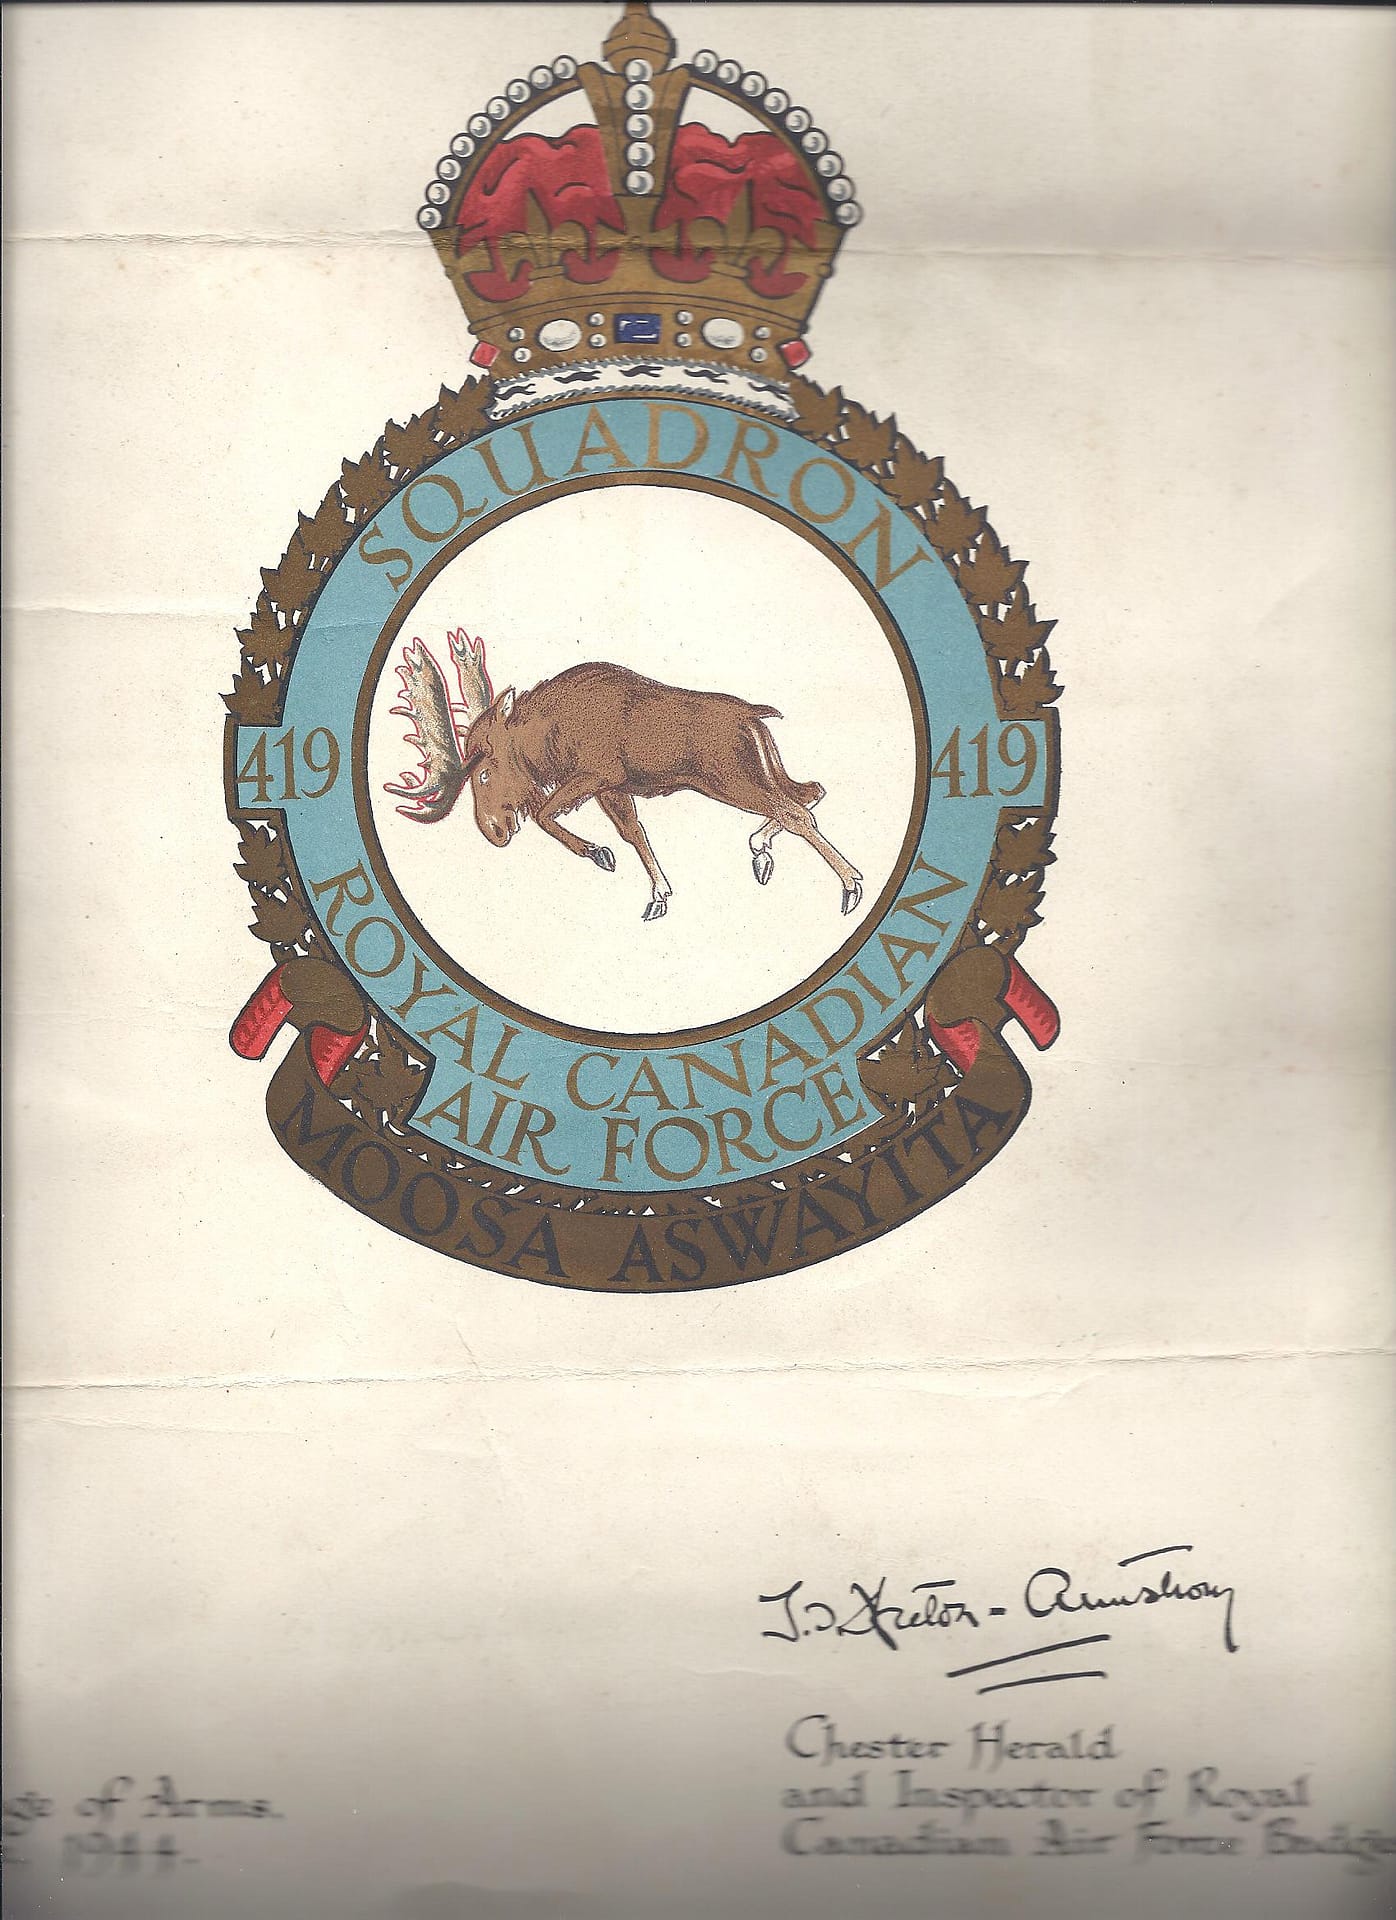 Charlie was given this poster of the Moose Squadron Canadian Air Force Badge